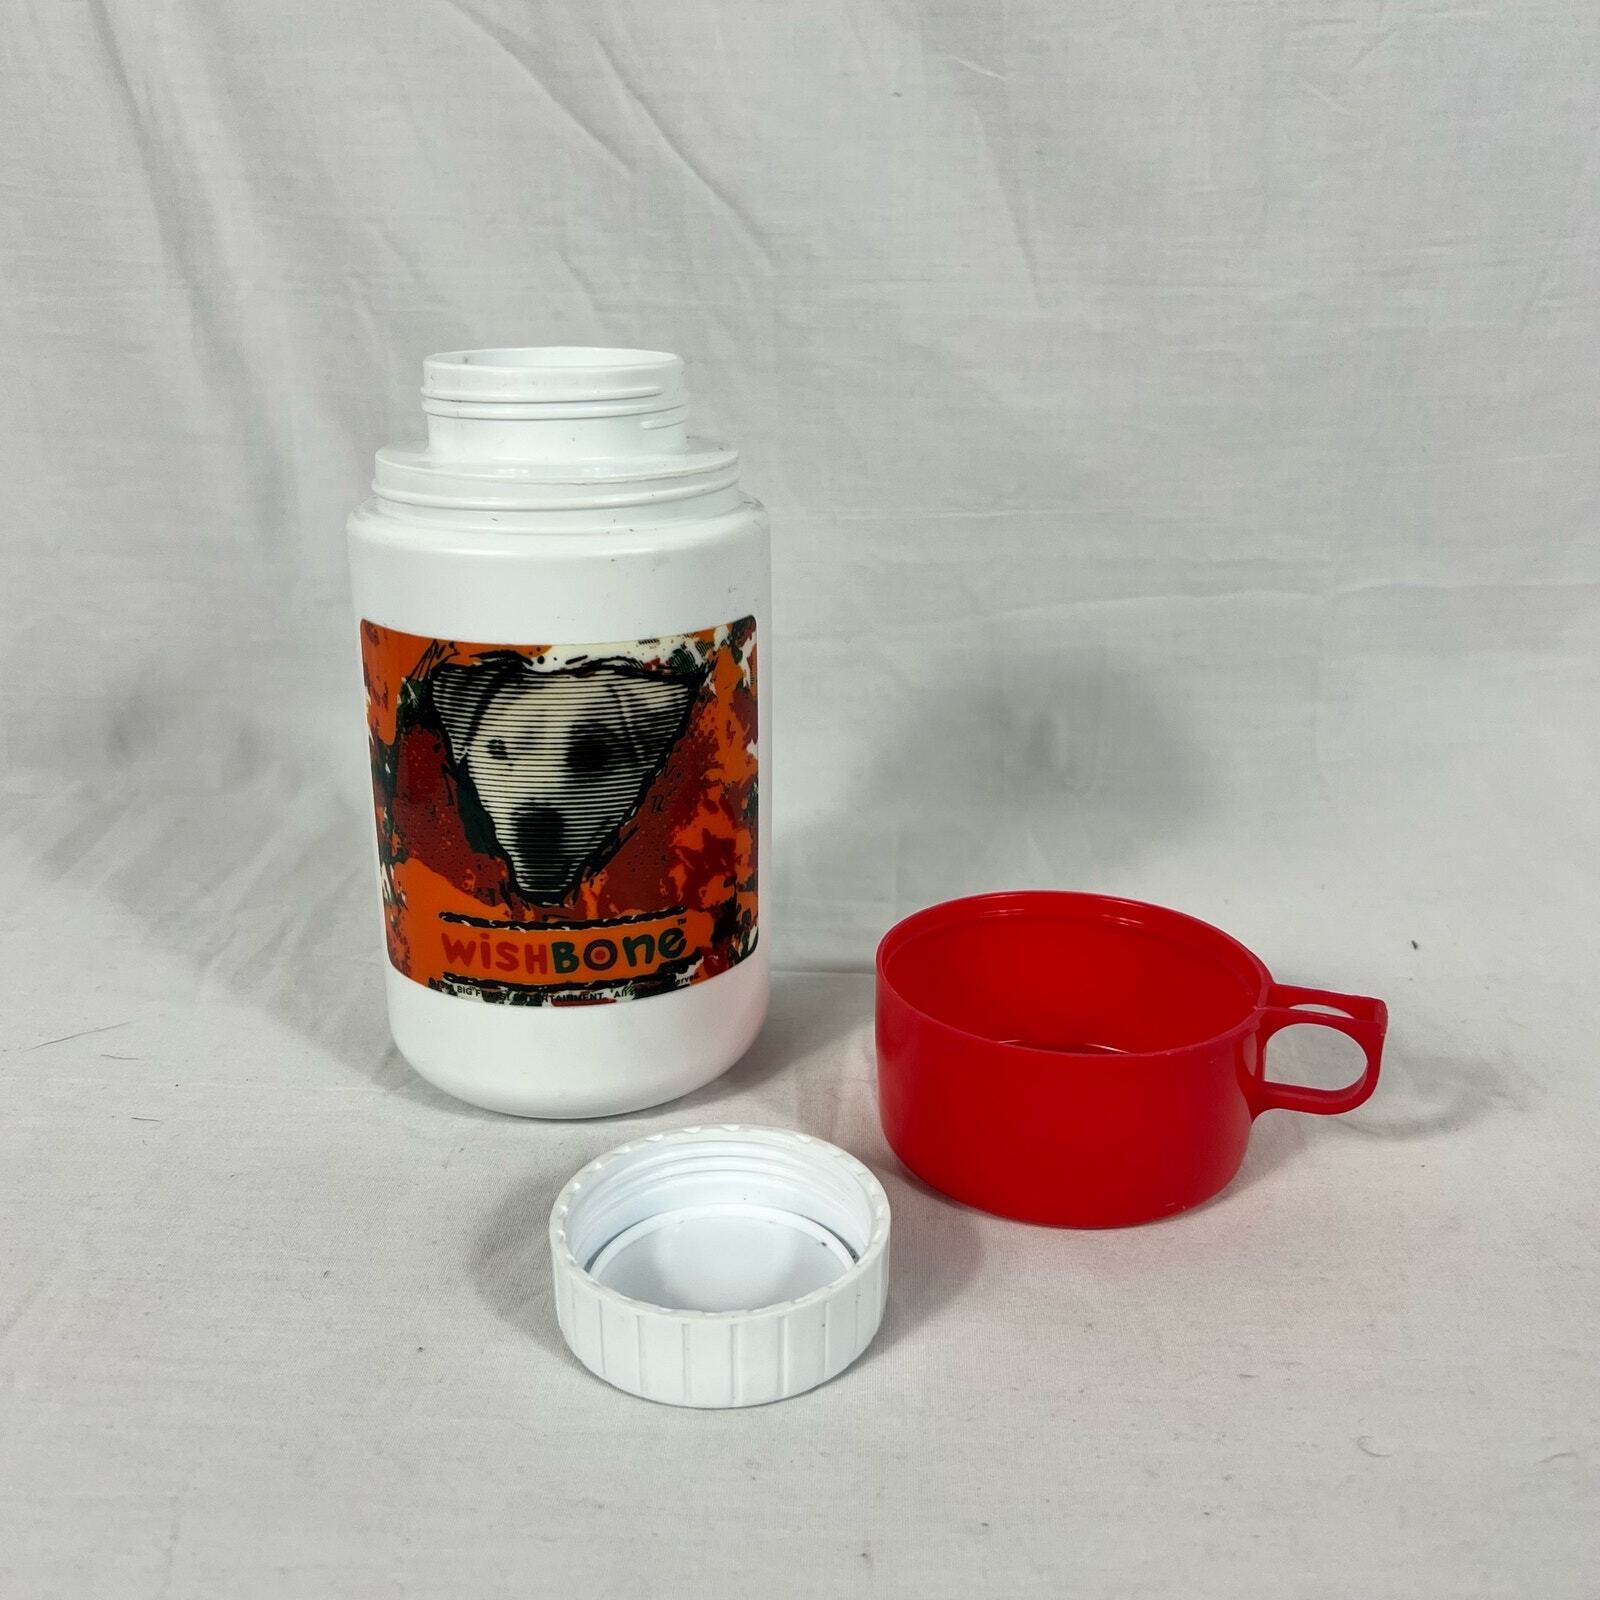 Wishbone Thermos Feed The Dog 1996 Vintage Drink Holder with Cup